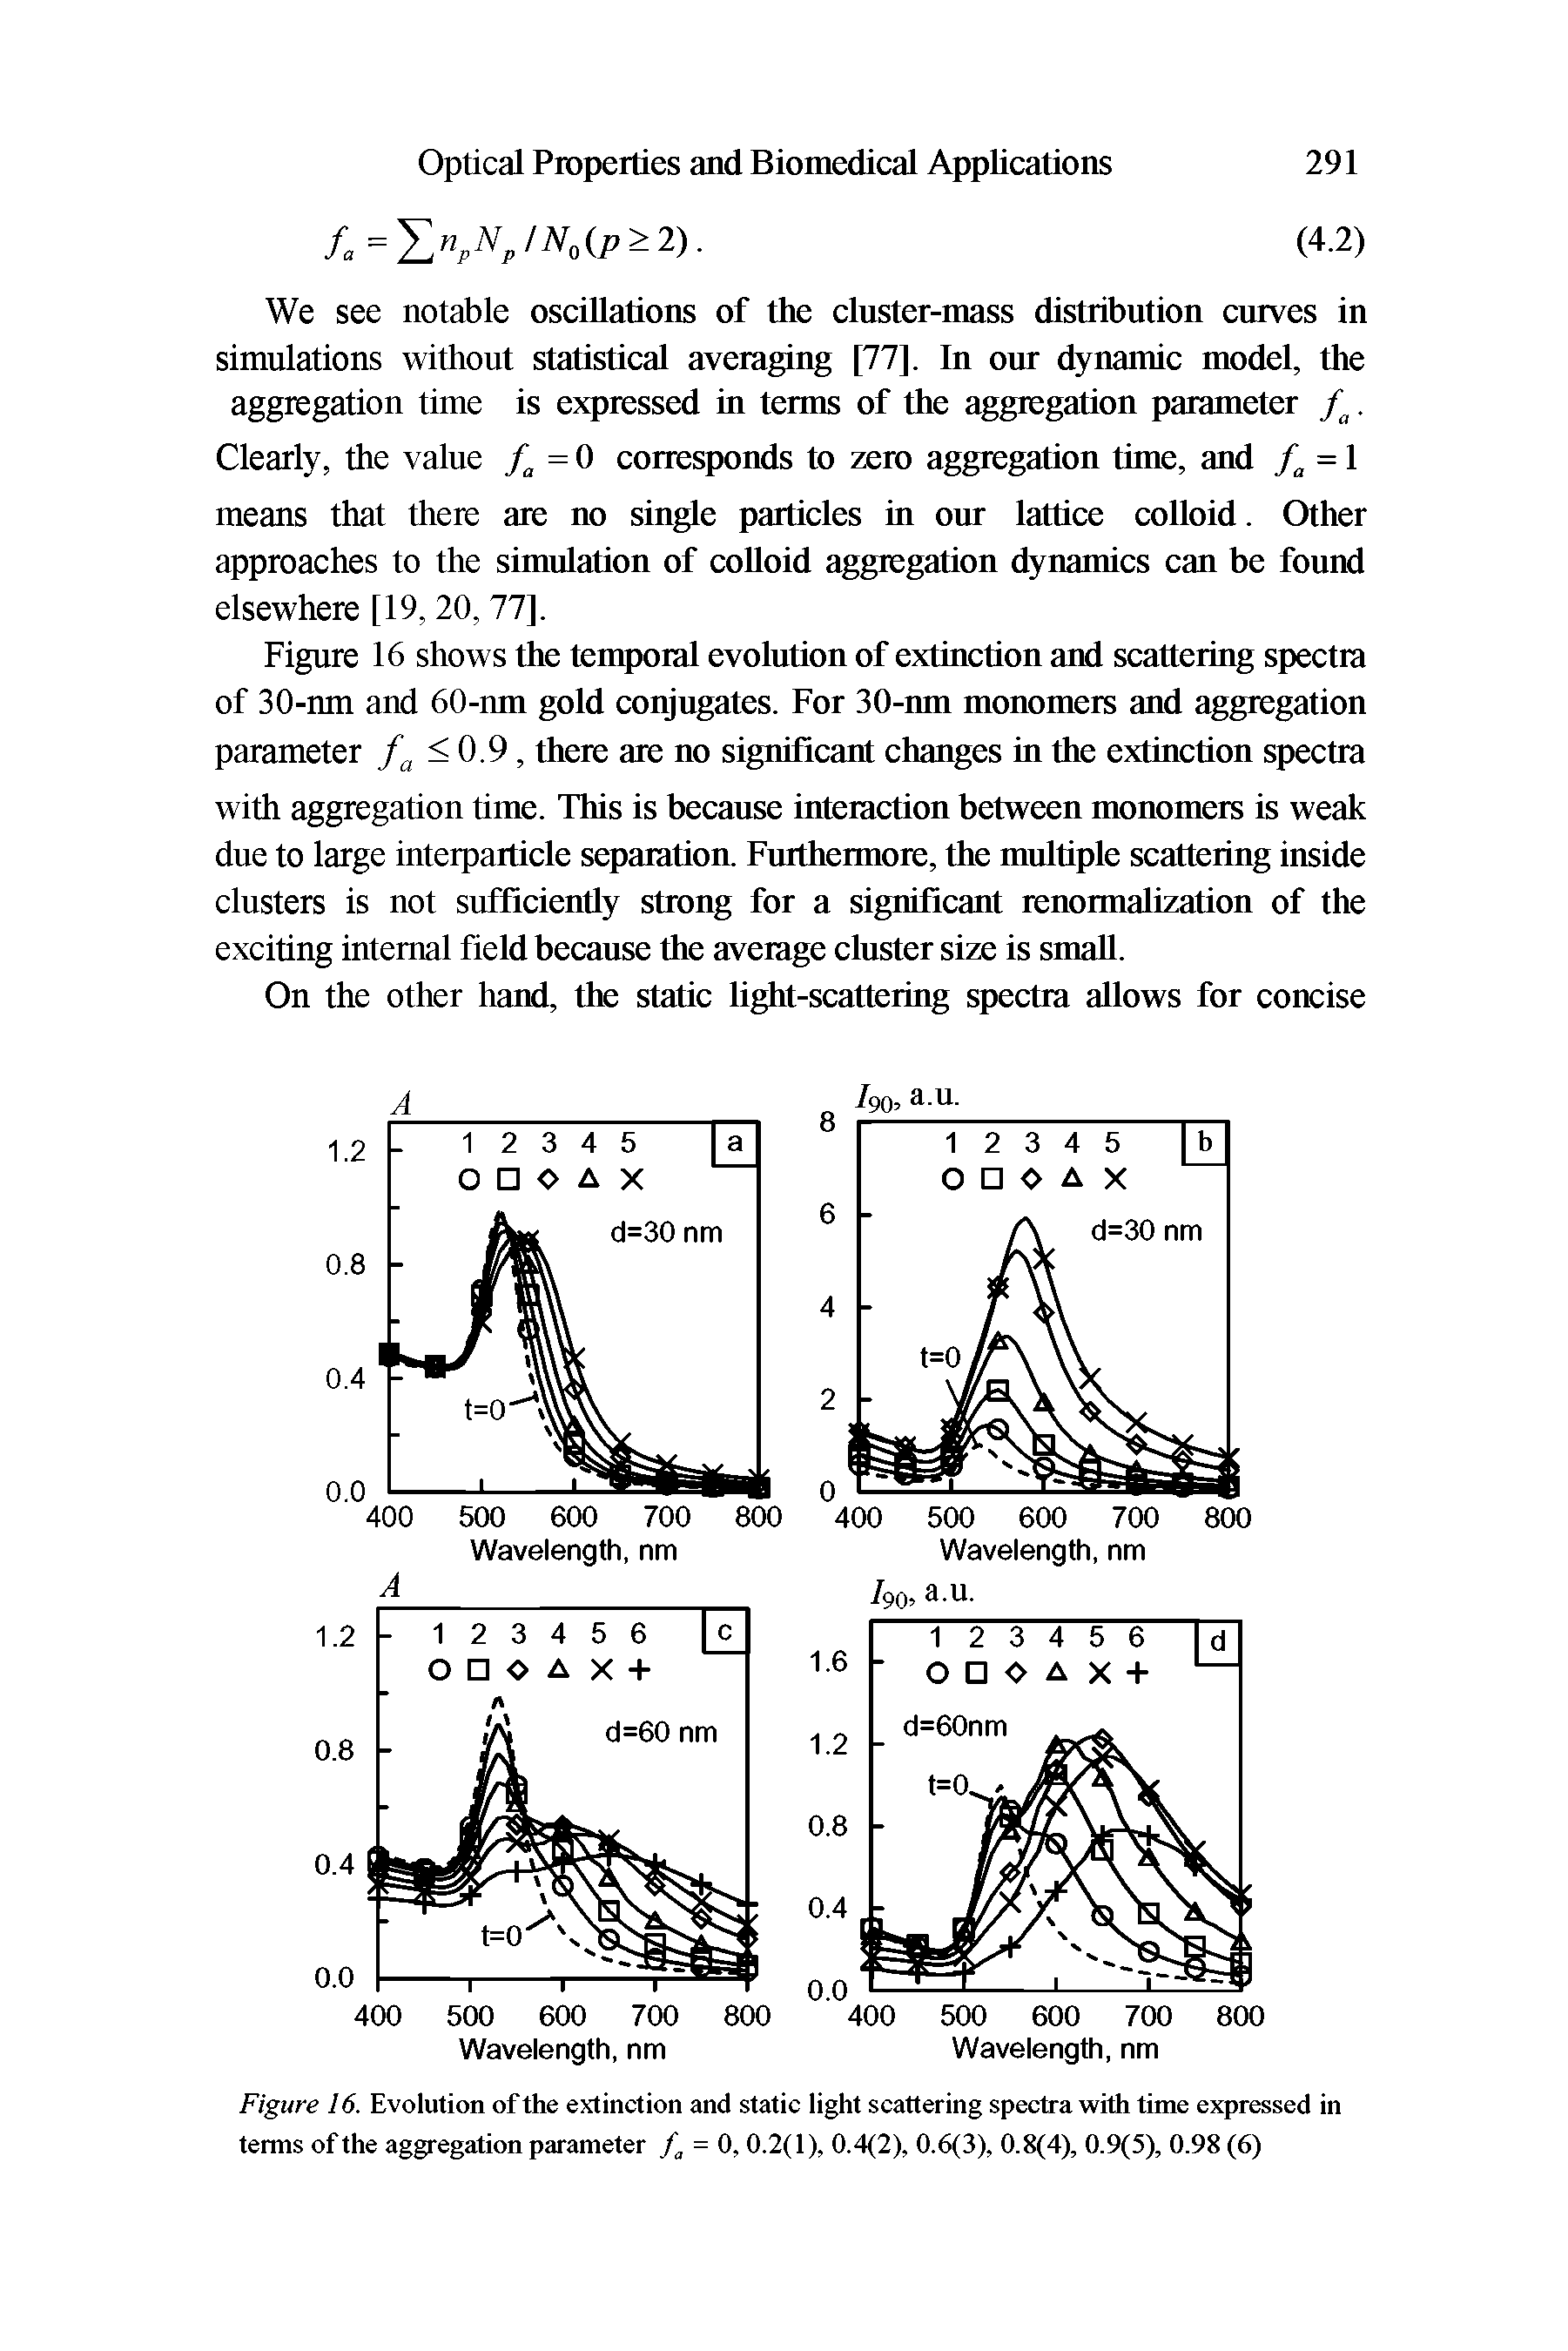 Figure 16. Evolution of the extinction and static light scattering spectra with time expressed in terms of the aggregation parameter /, = 0, 0.2(1), 0.4(2), 0.6(3), 0.8(4), 0.9(5), 0.98 (6)...